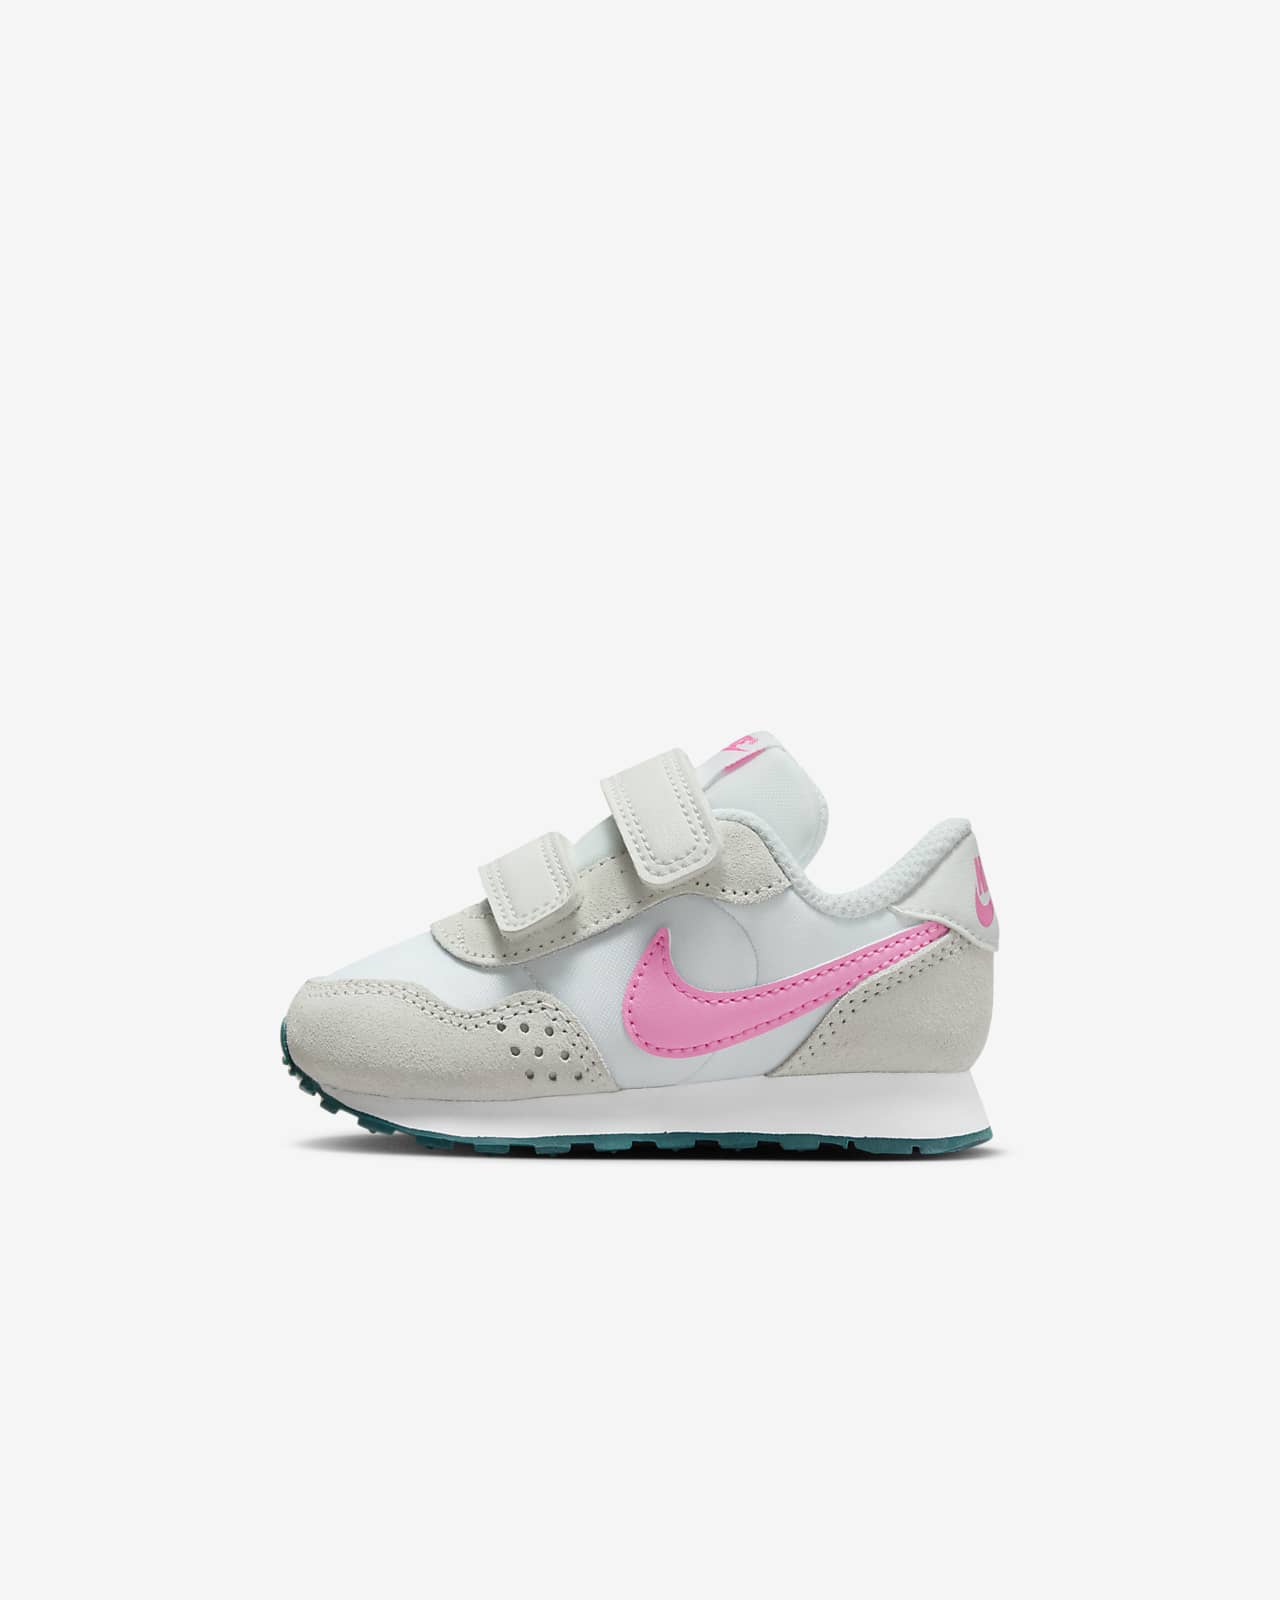 [Super willkommen] Nike MD Baby Valiant Shoe. Toddler and ID Nike